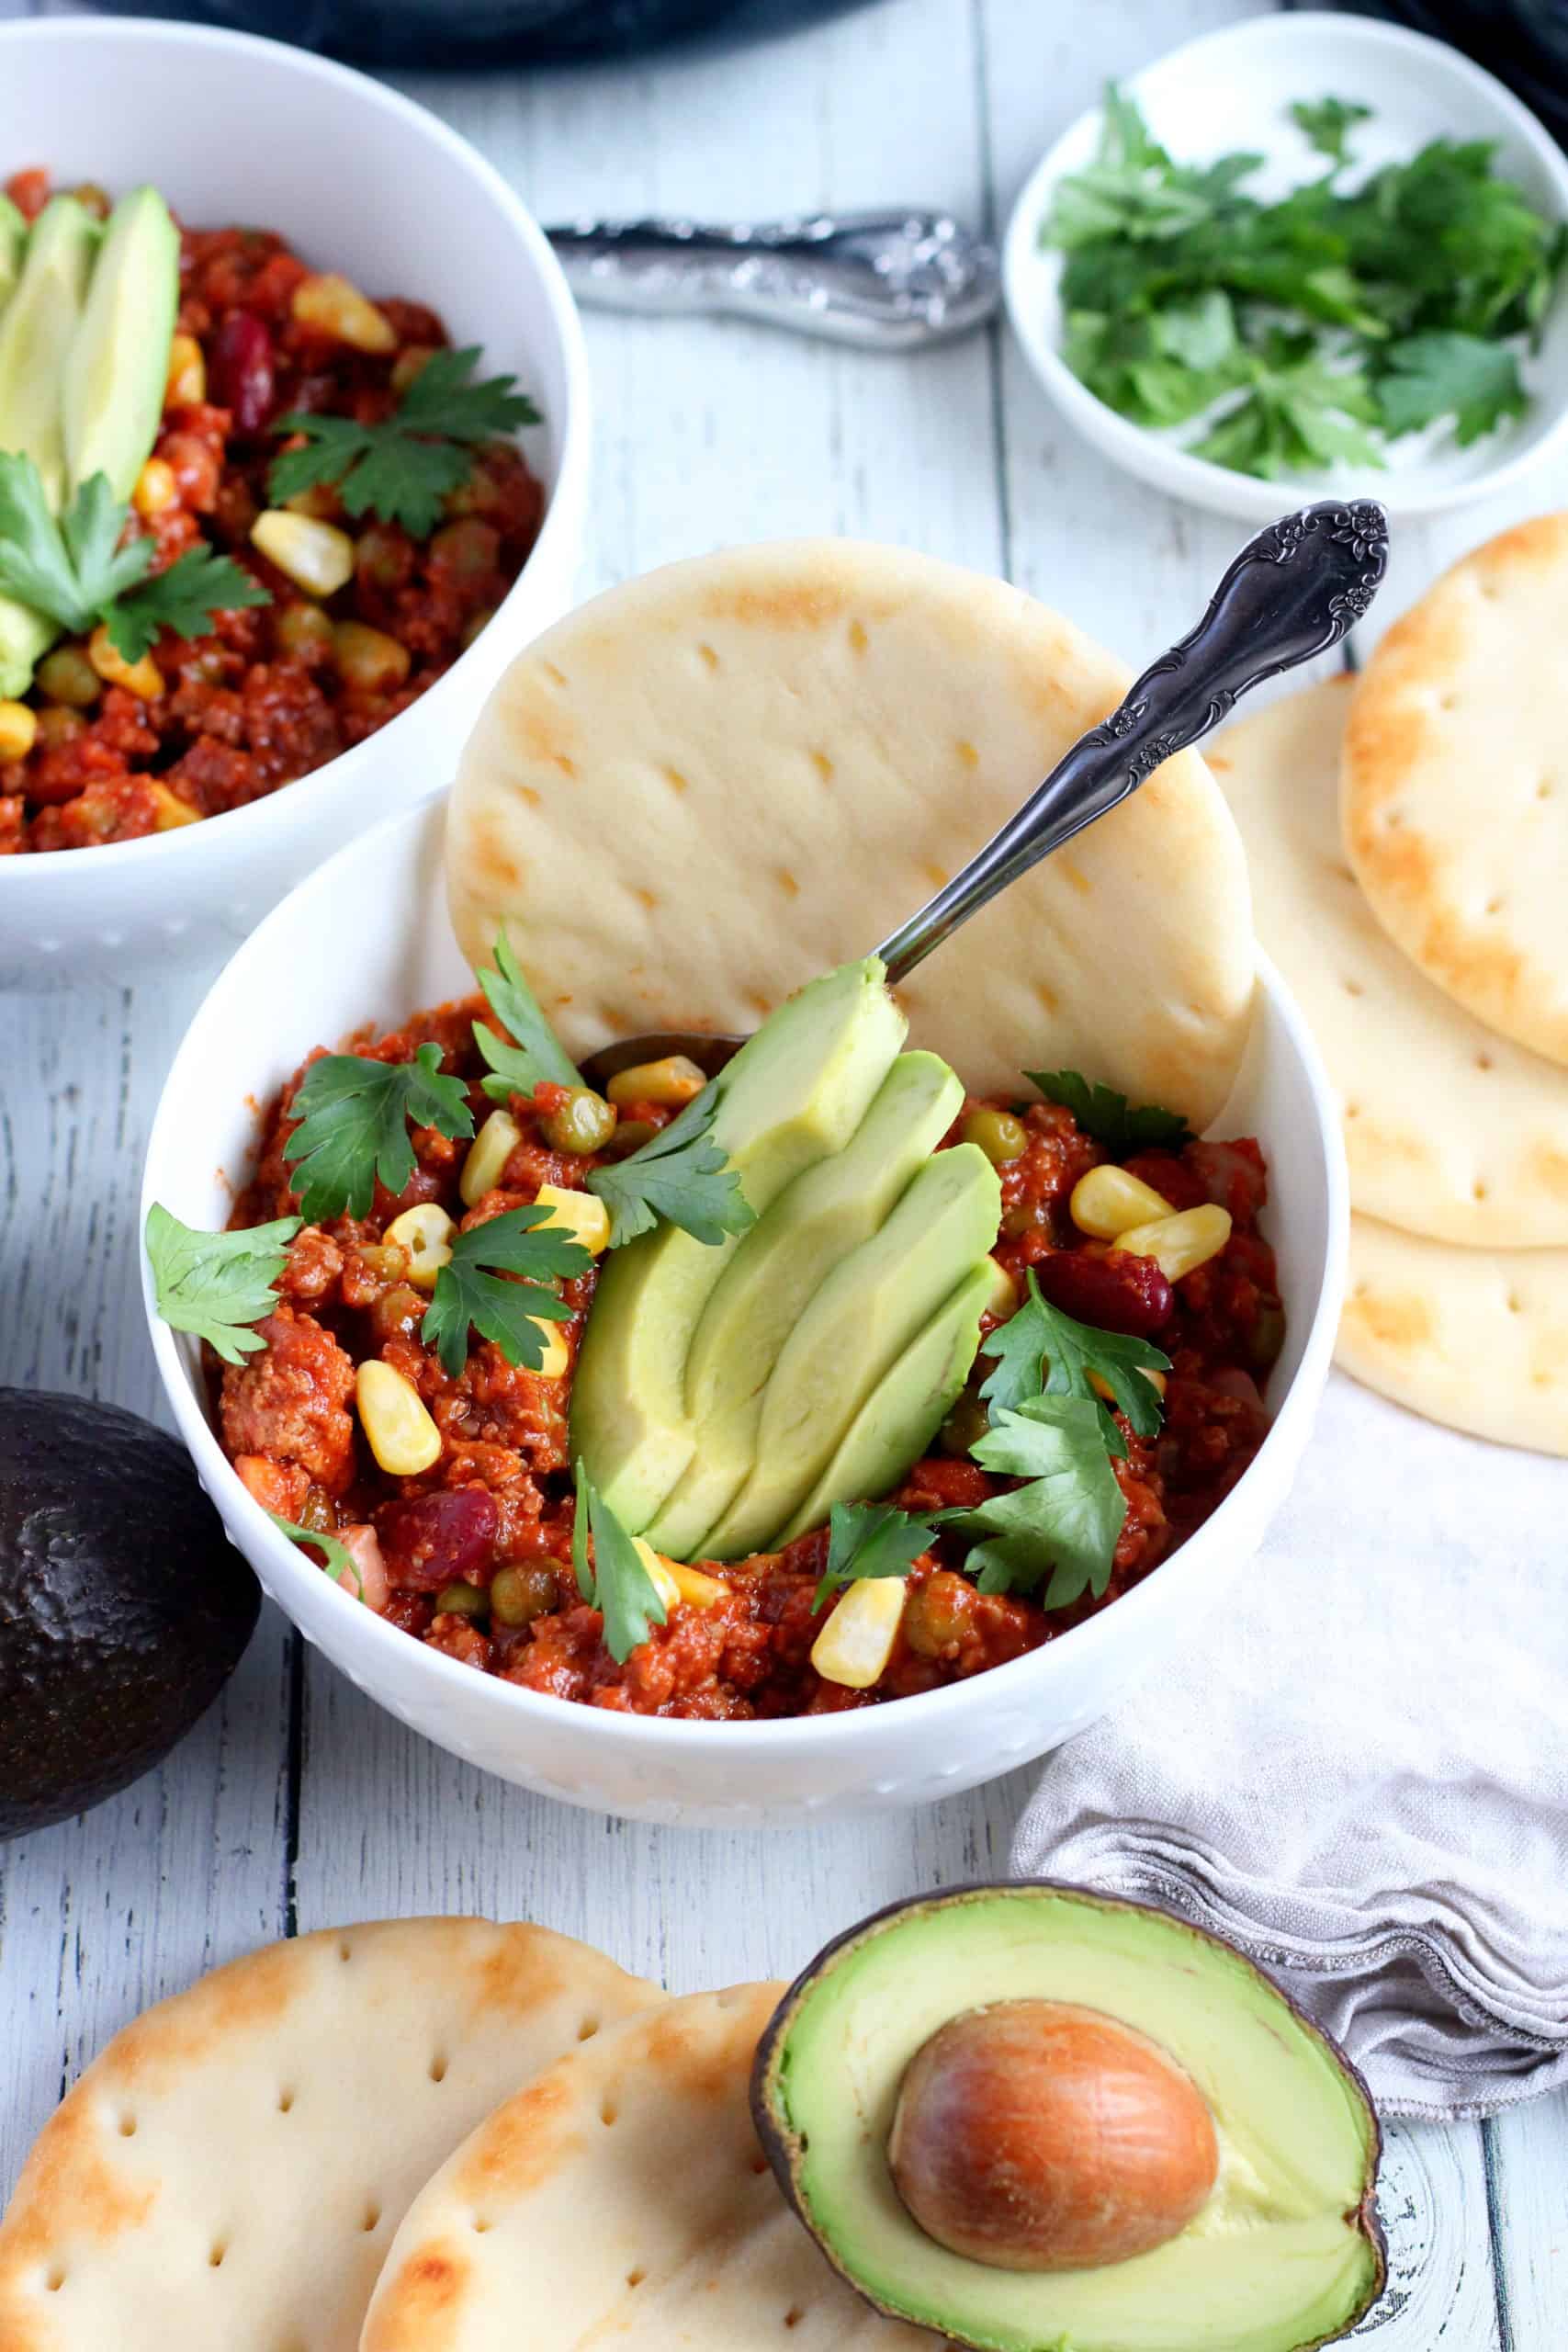 minced meat chili con carne in white bowl topped with avocado and flat bread